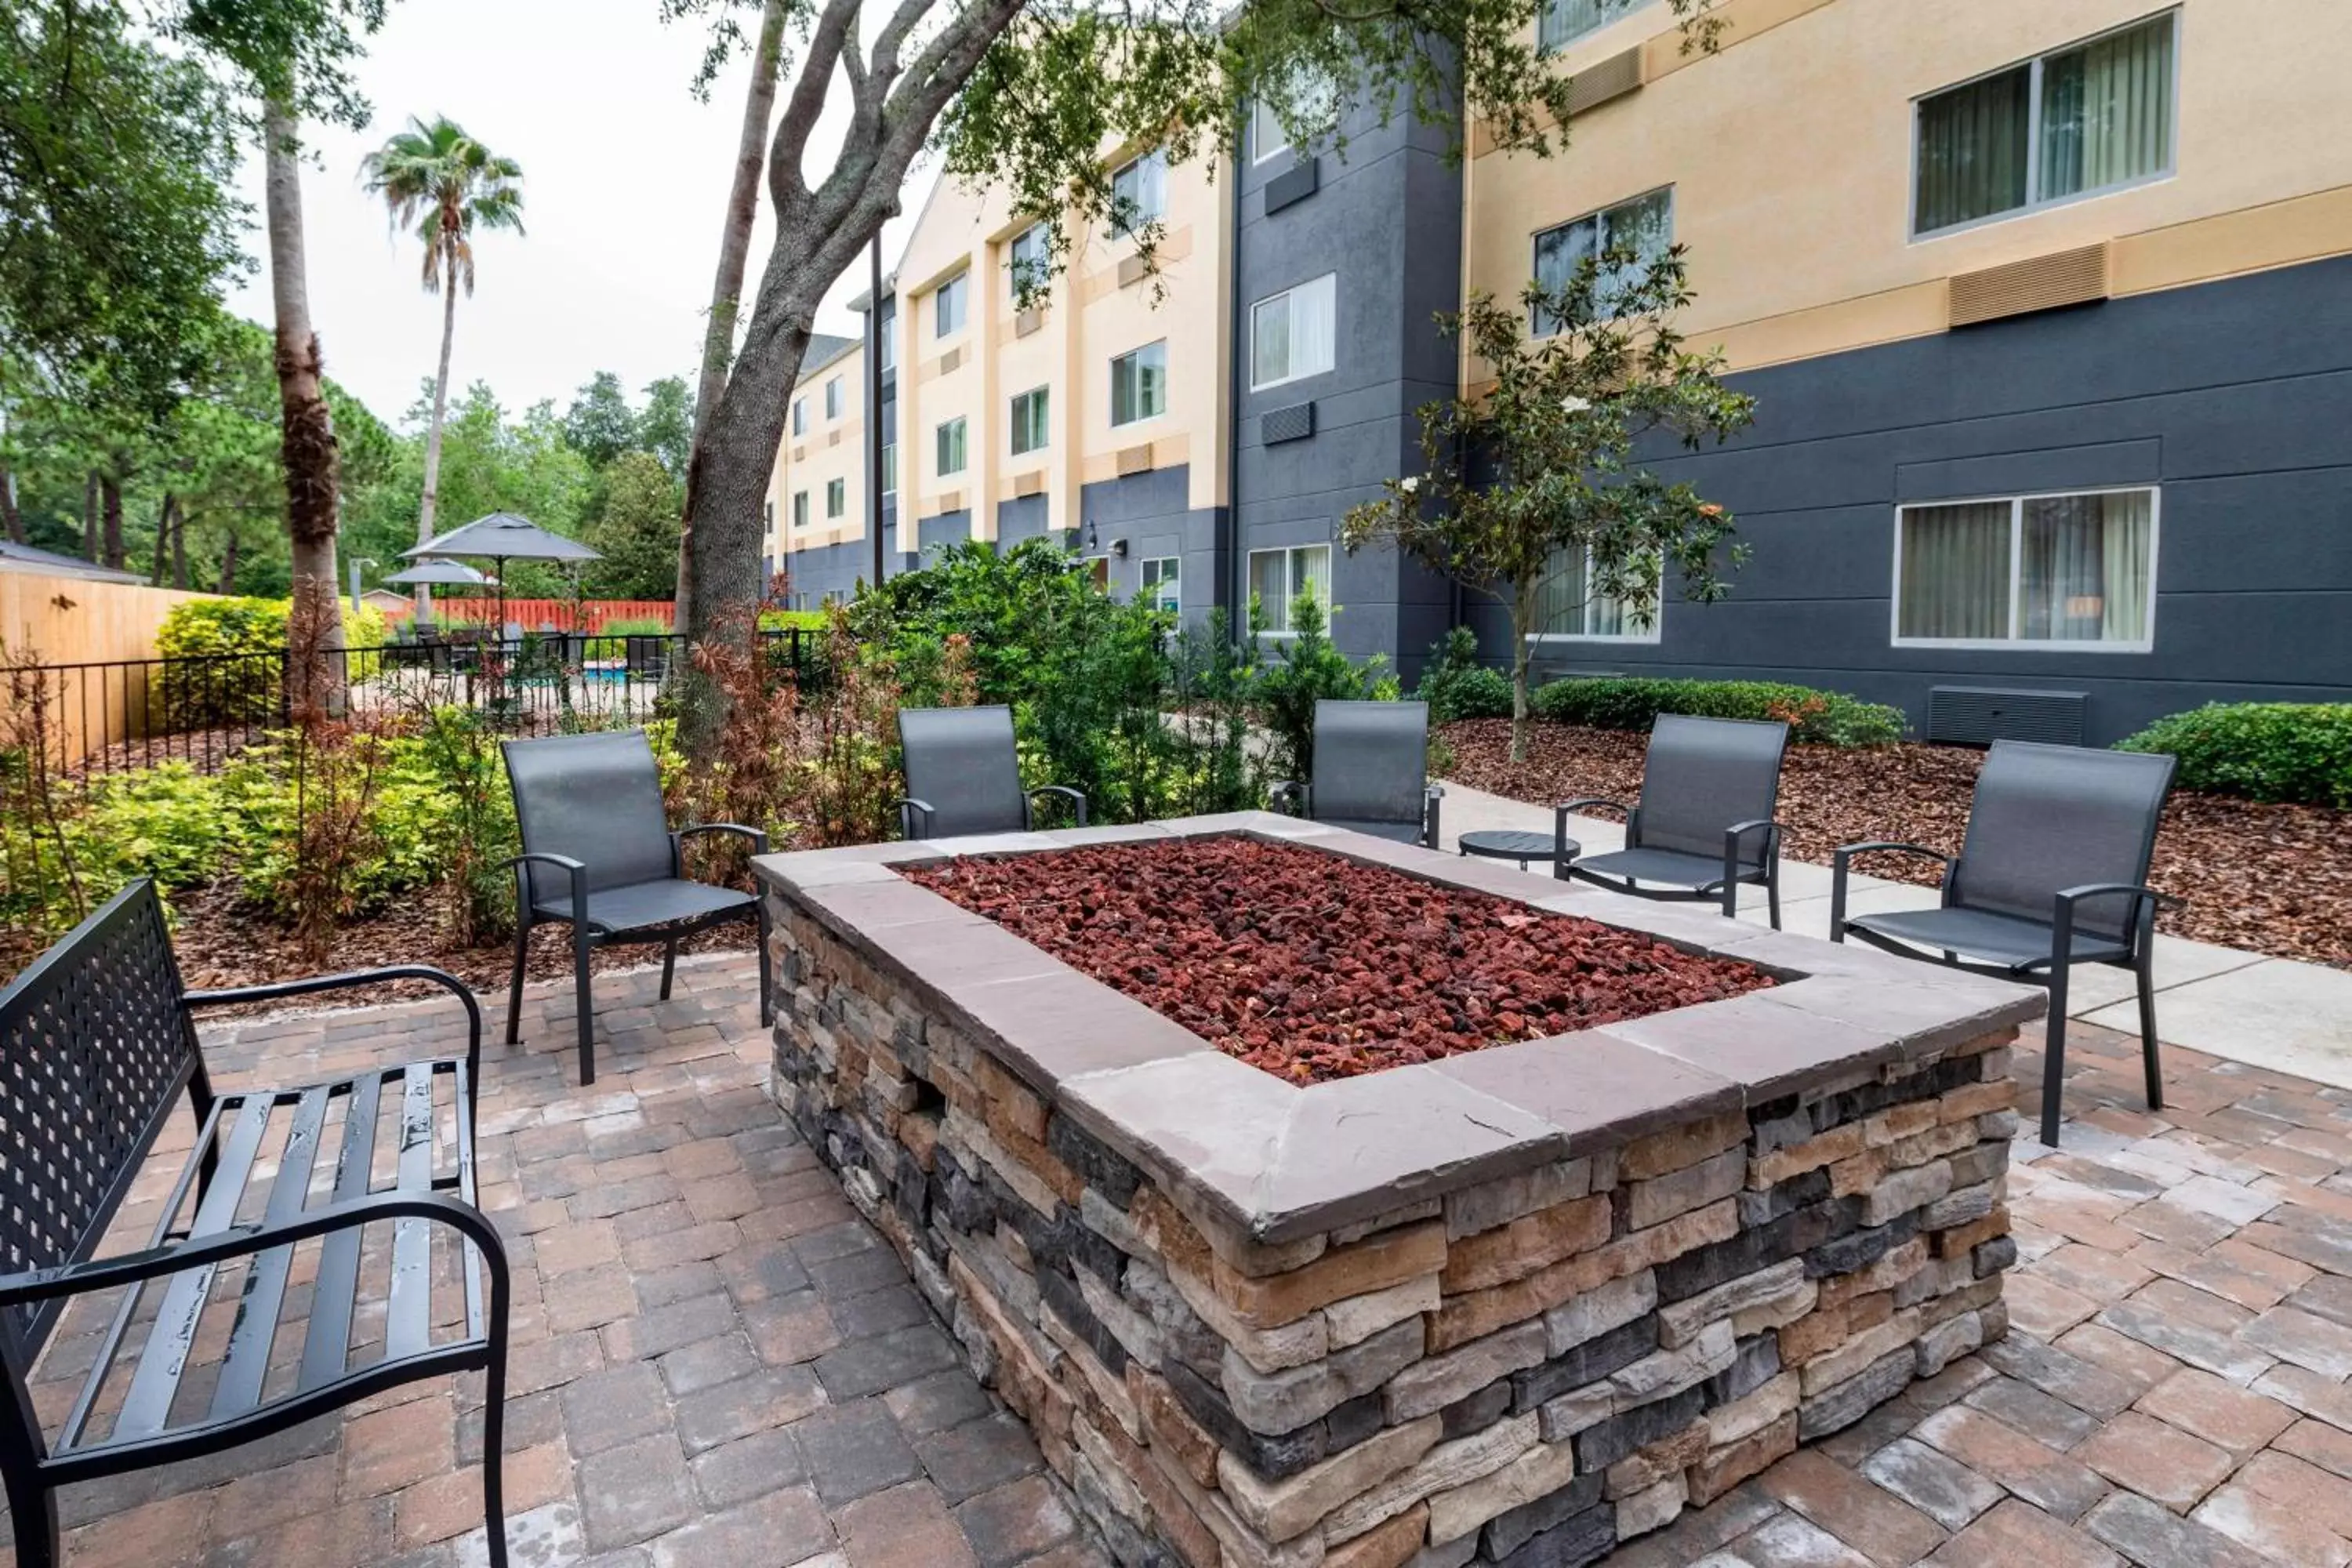 Property building in Fairfield Inn and Suites St Petersburg Clearwater